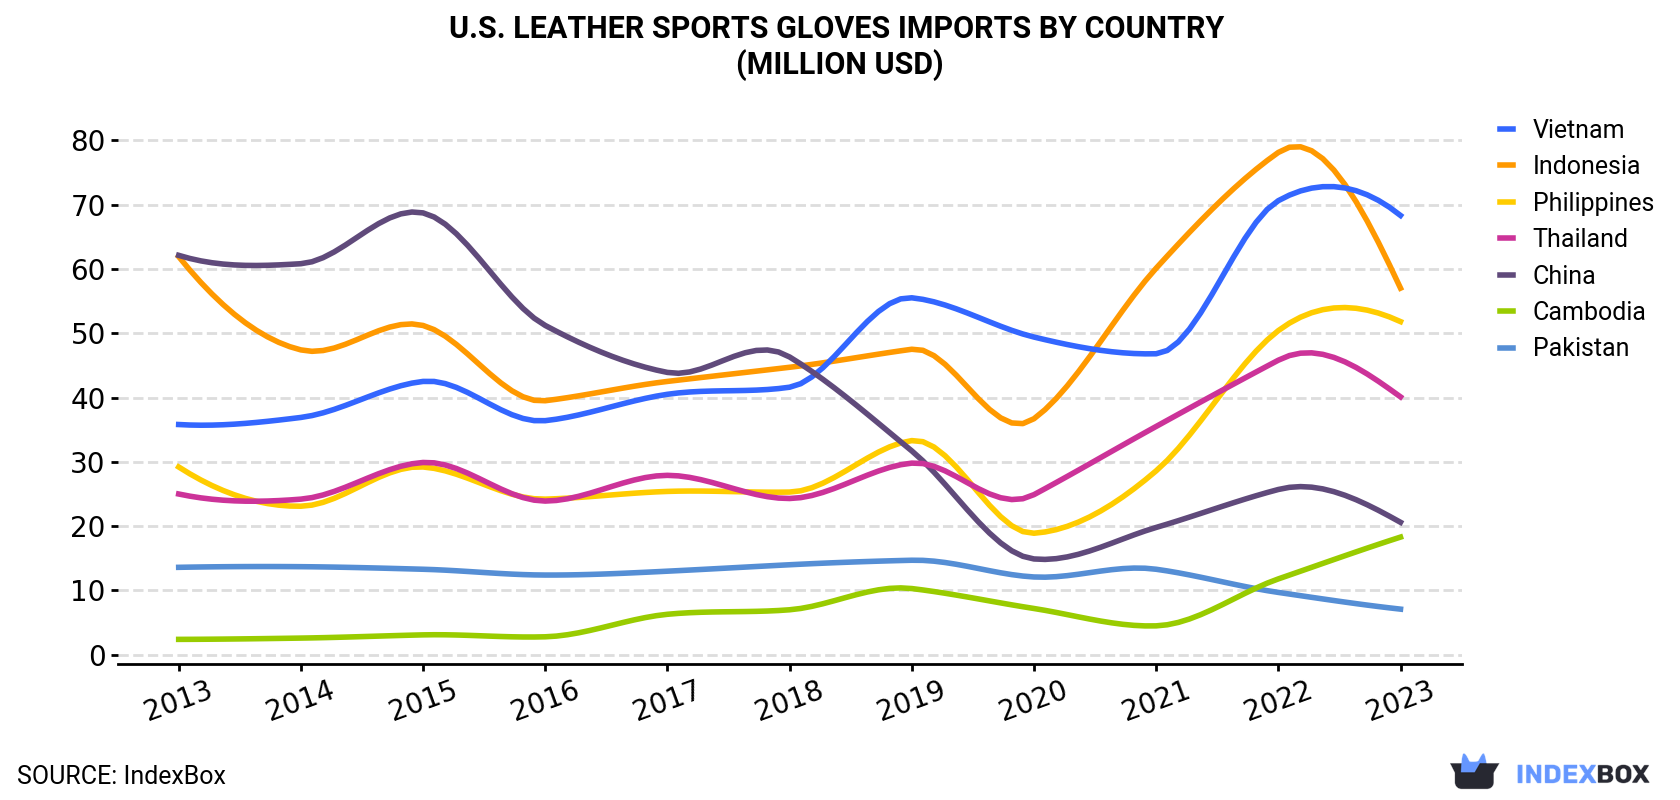 U.S. Leather Sports Gloves Imports By Country (Million USD)